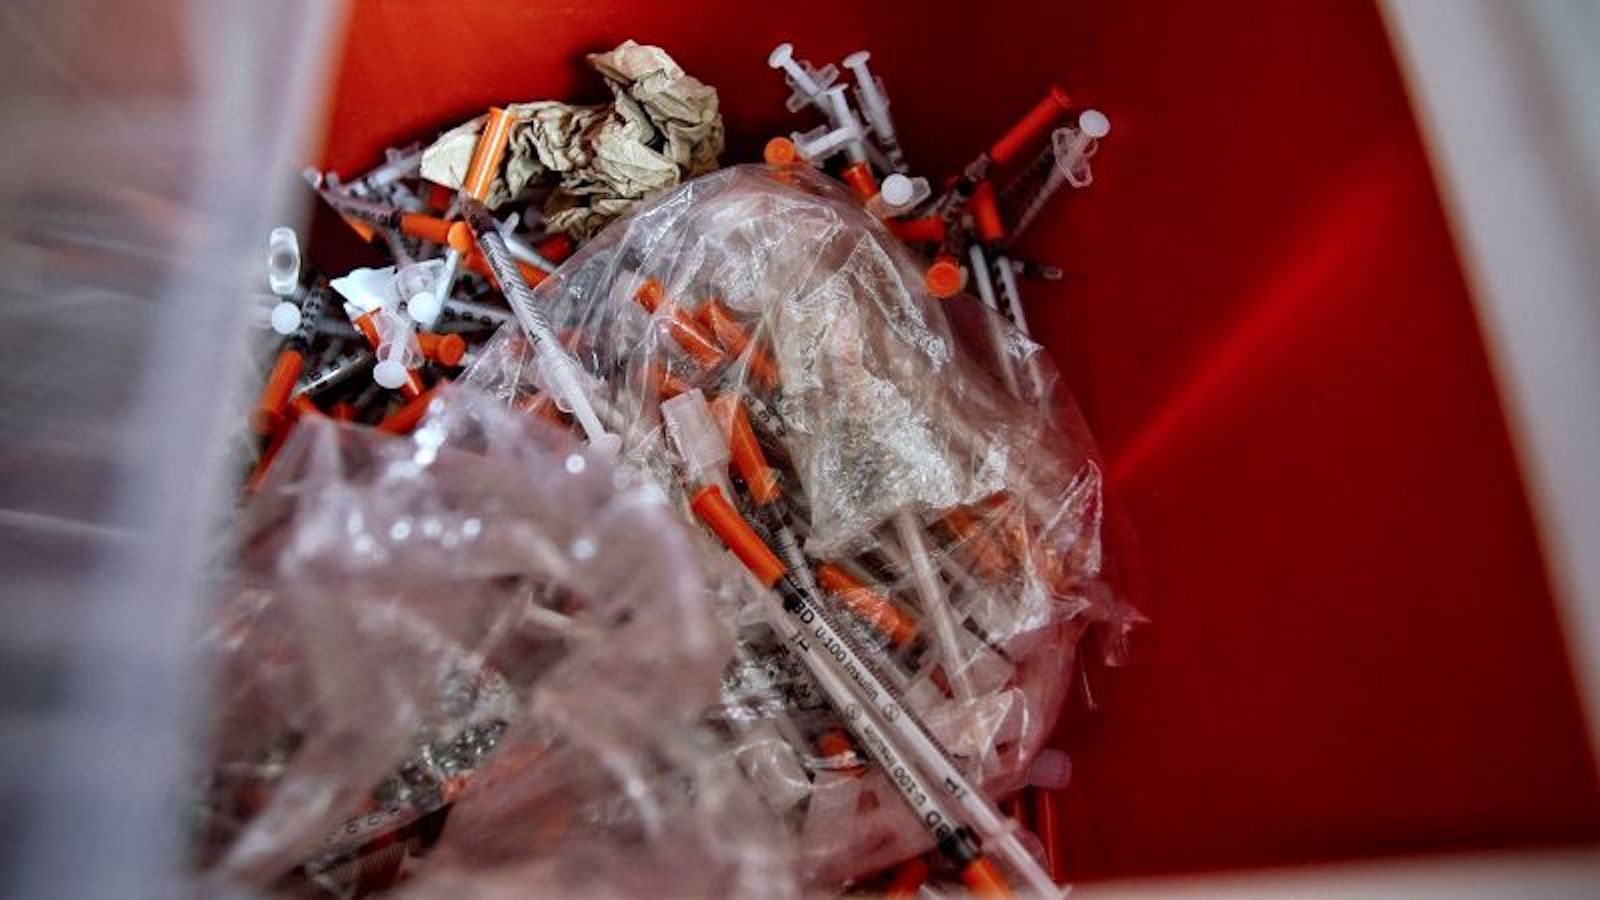 New Report Details Deadly Rise in Fentanyl Overdoses in the US